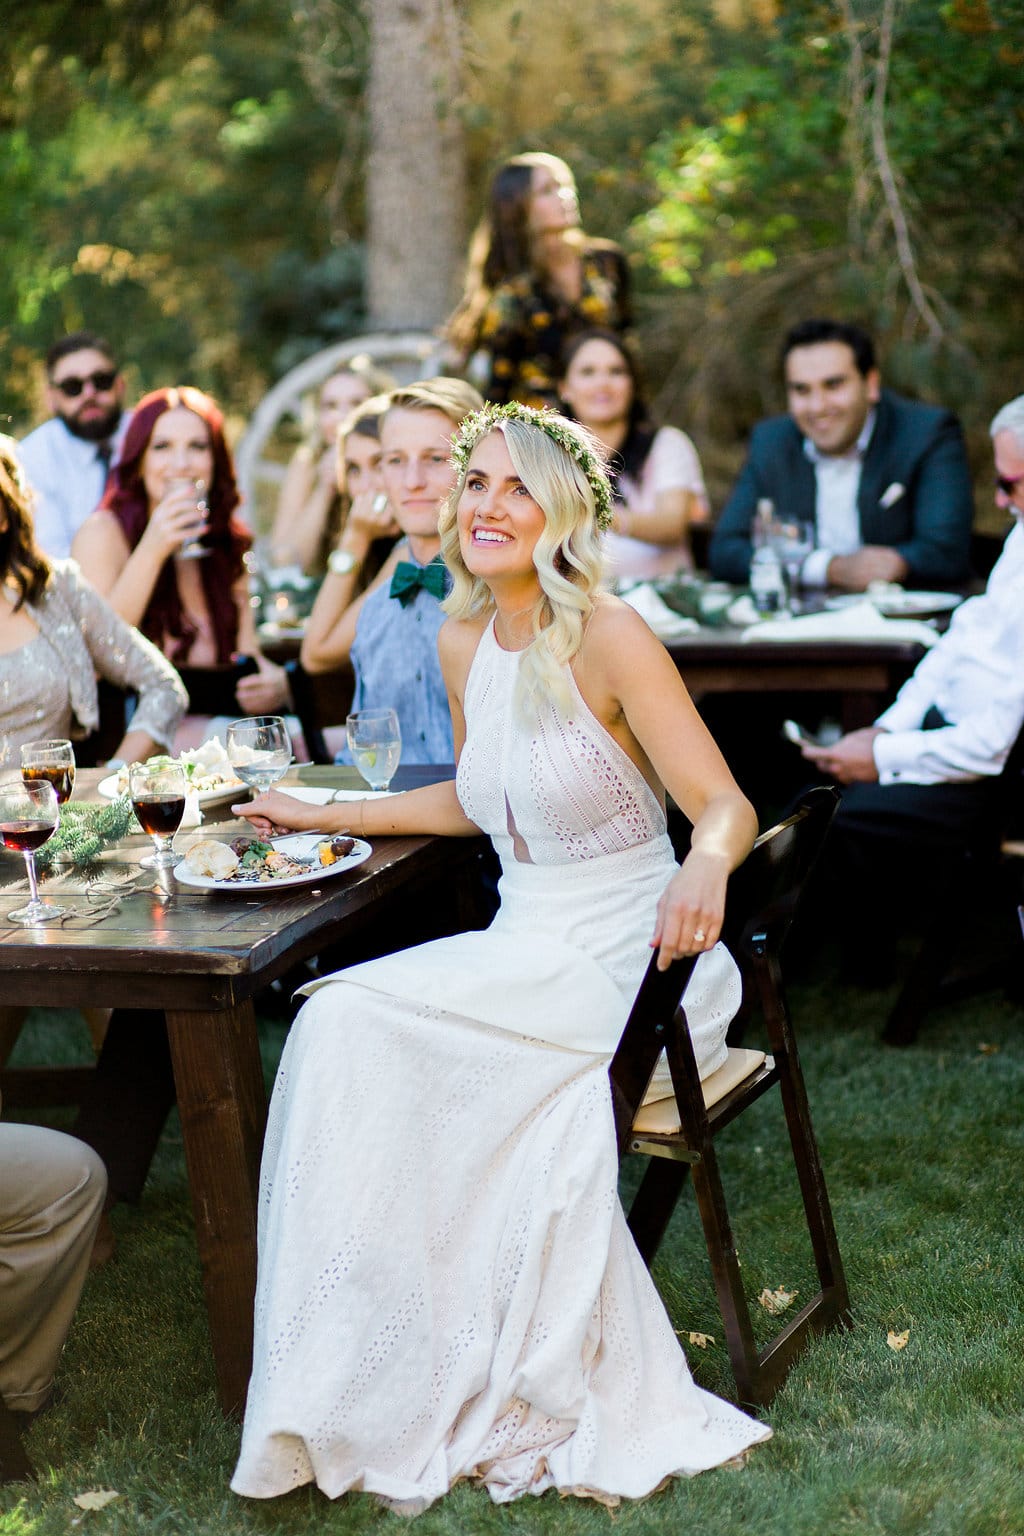 Eyelet Lace Wedding Gown in Utah Canyon Wedding - Midgley bride is wearing Nicole by Sottero and Midgley